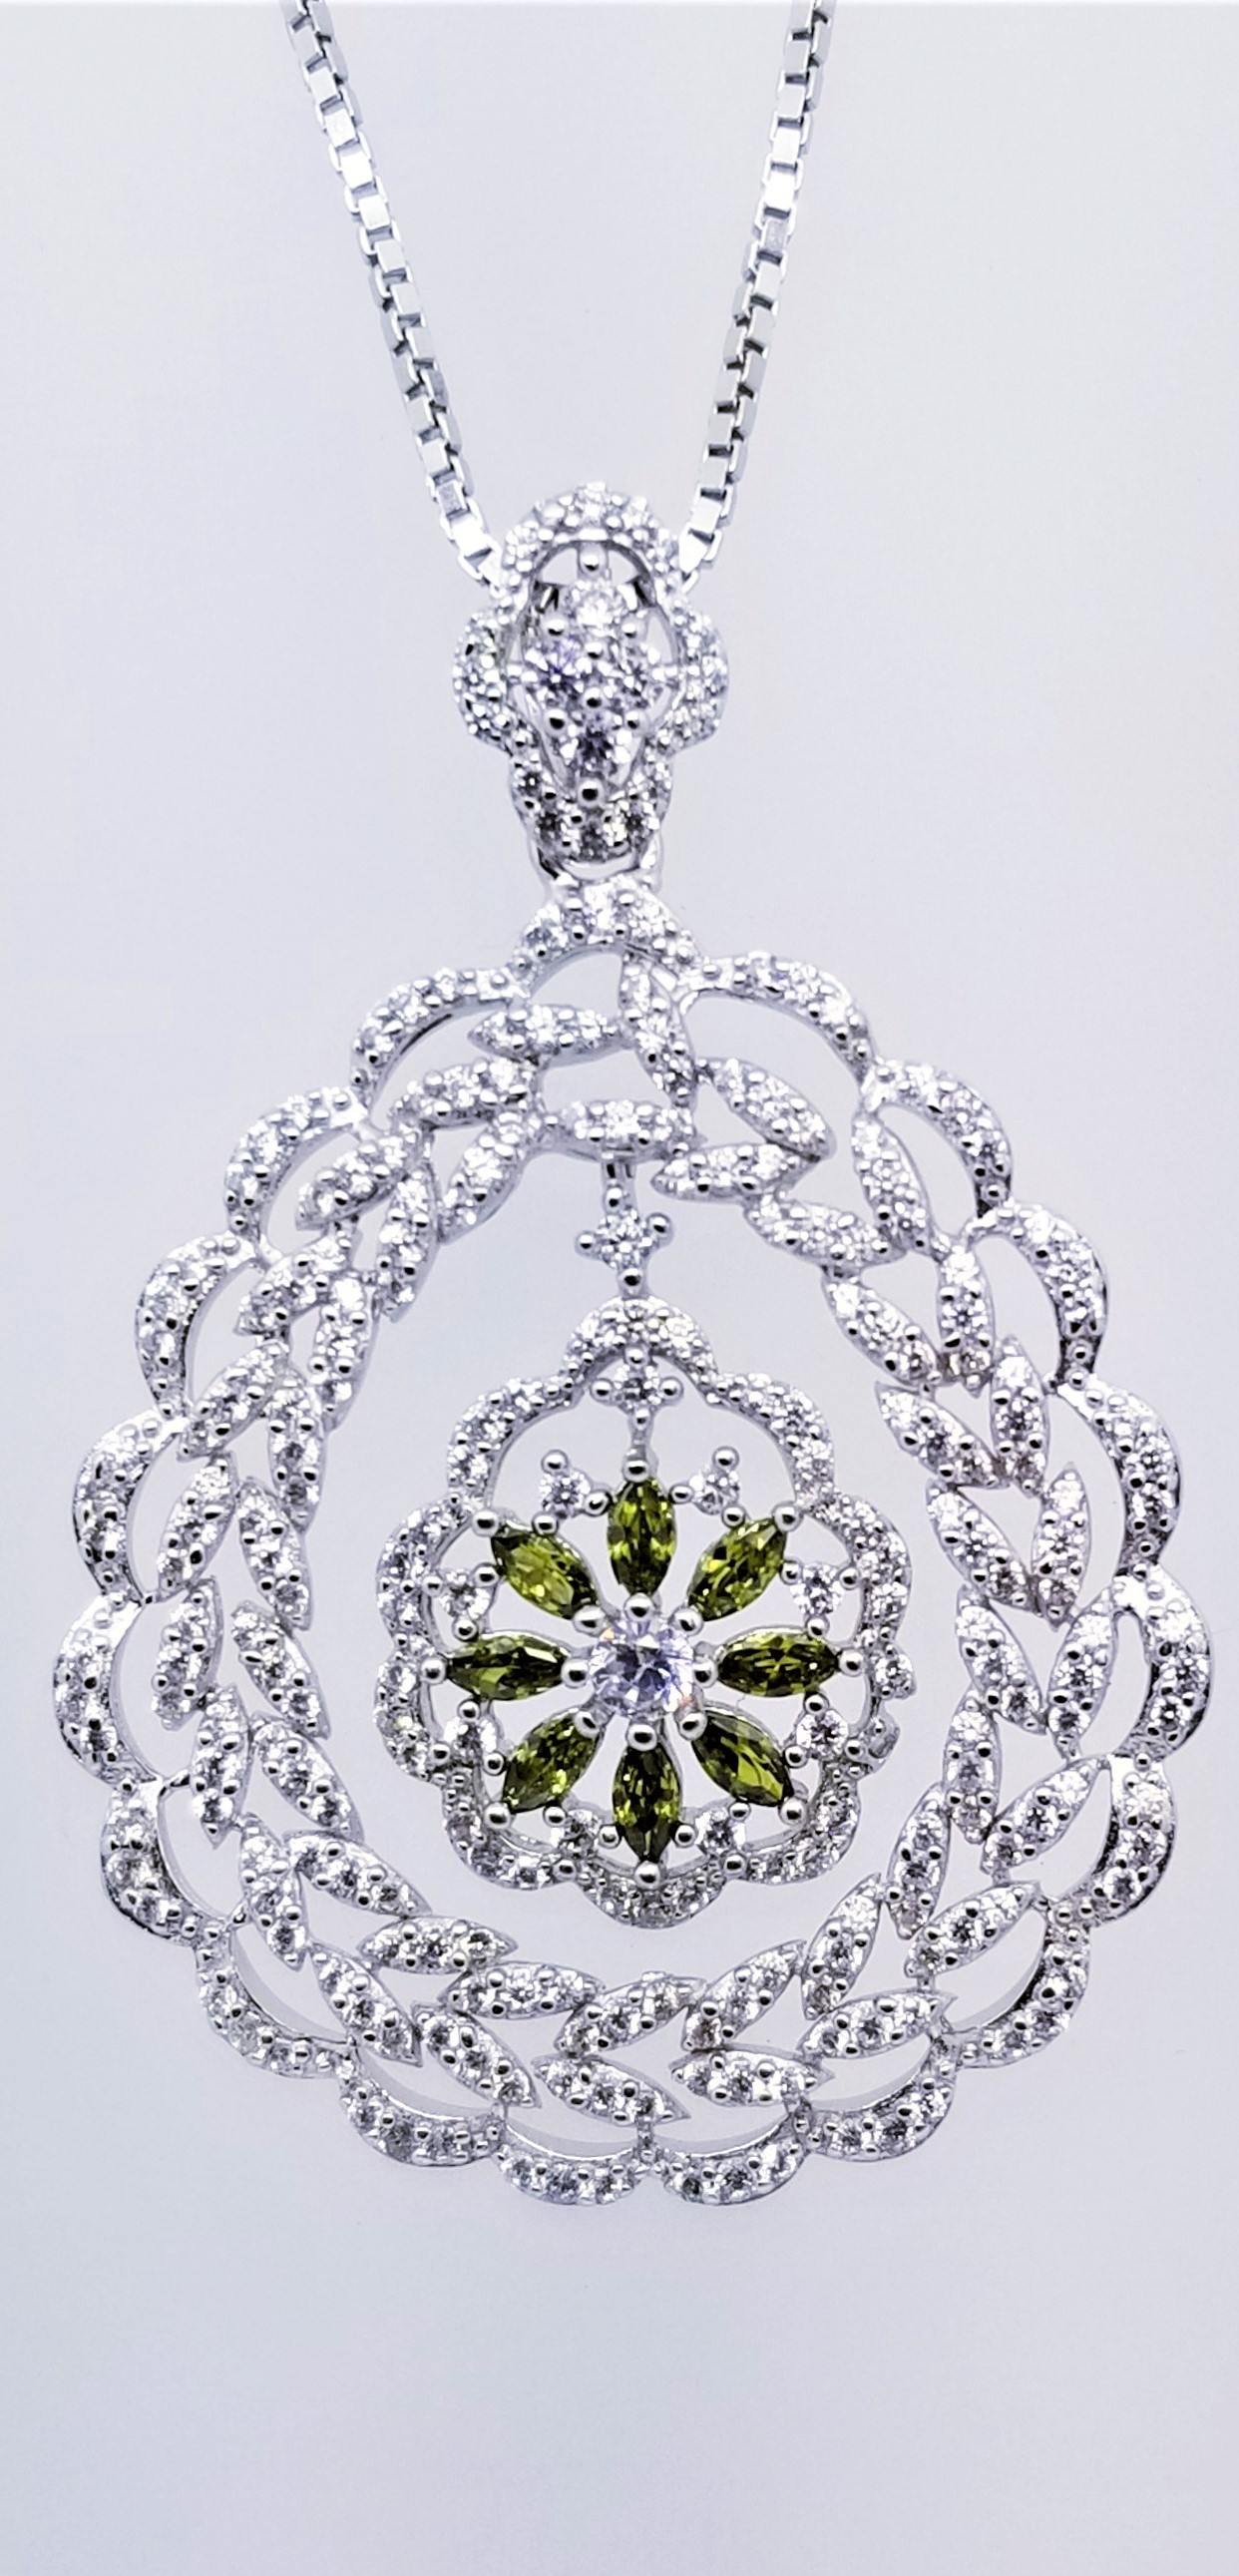 925 Sterling Silver Rhodium Tone Pendant With Peridot And CZ Stones